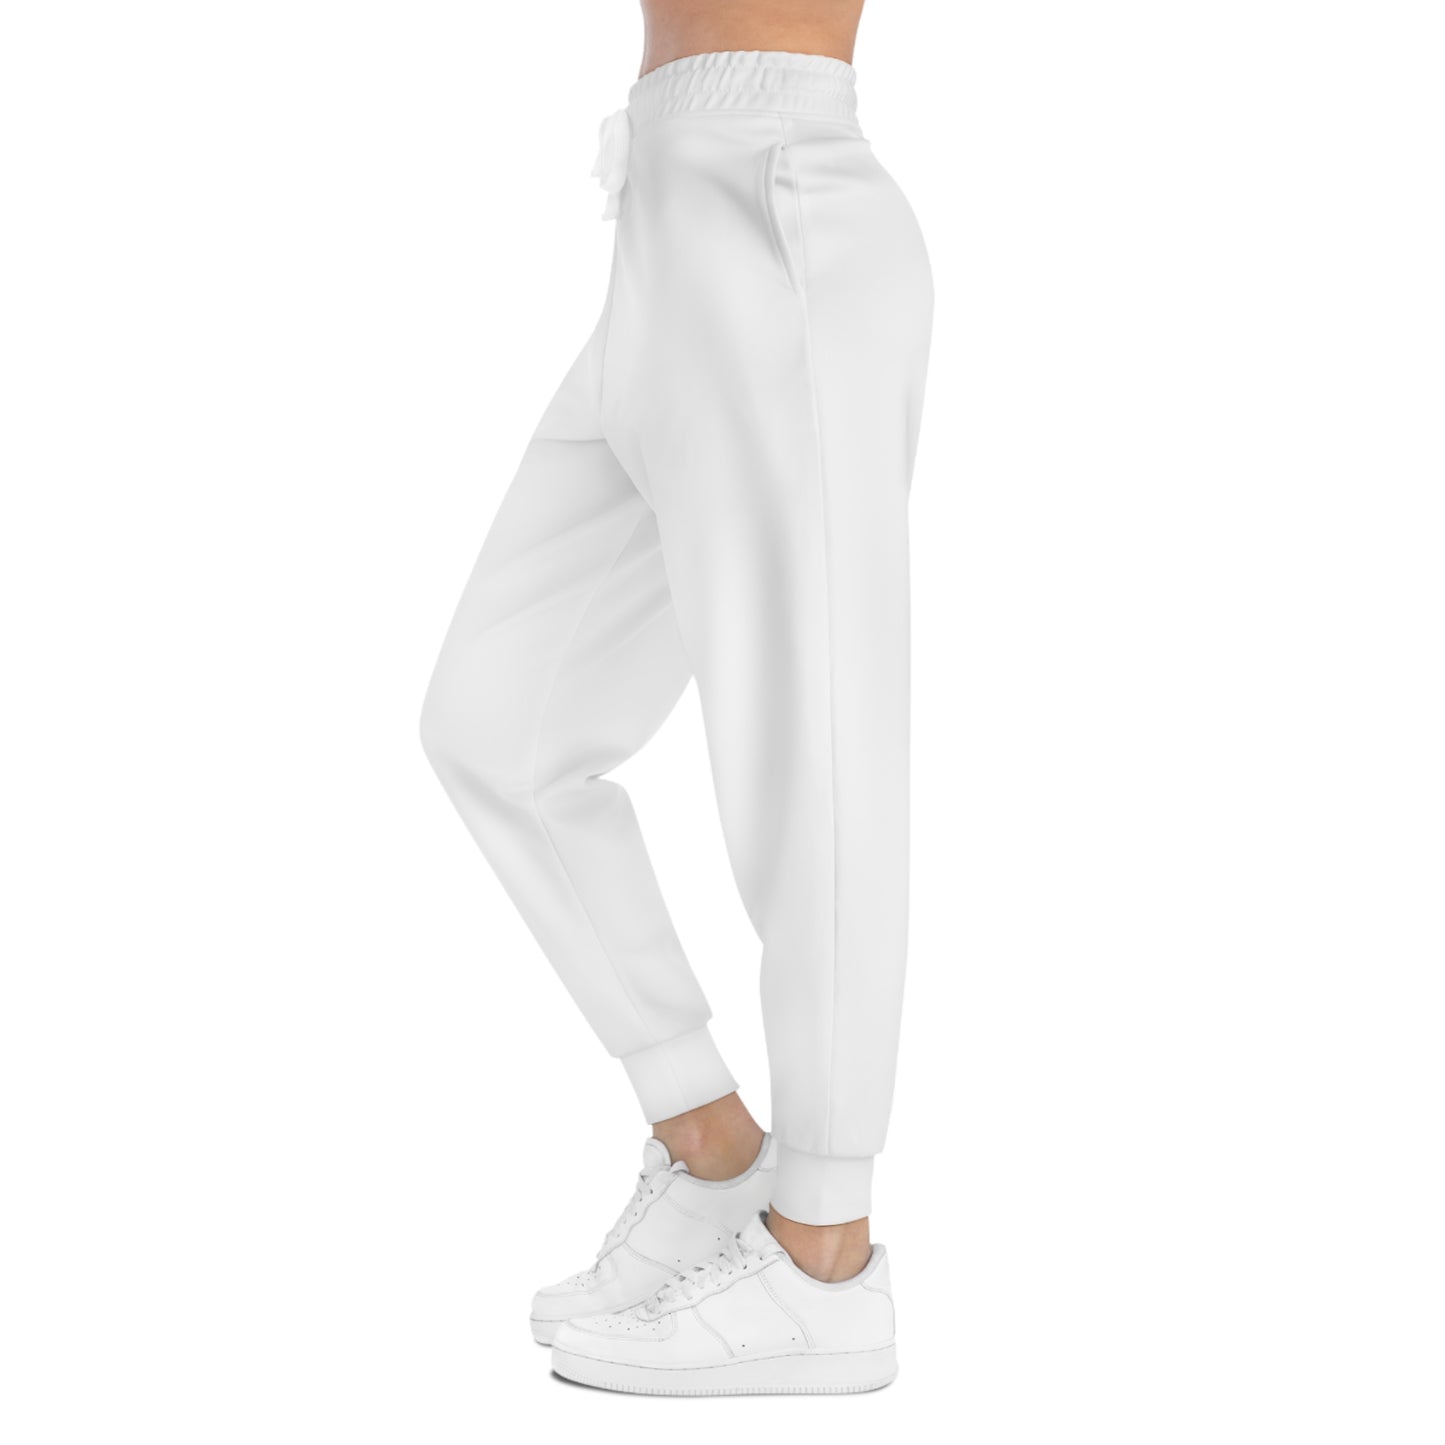 Lucky Bet's Athletic Jogger Pants